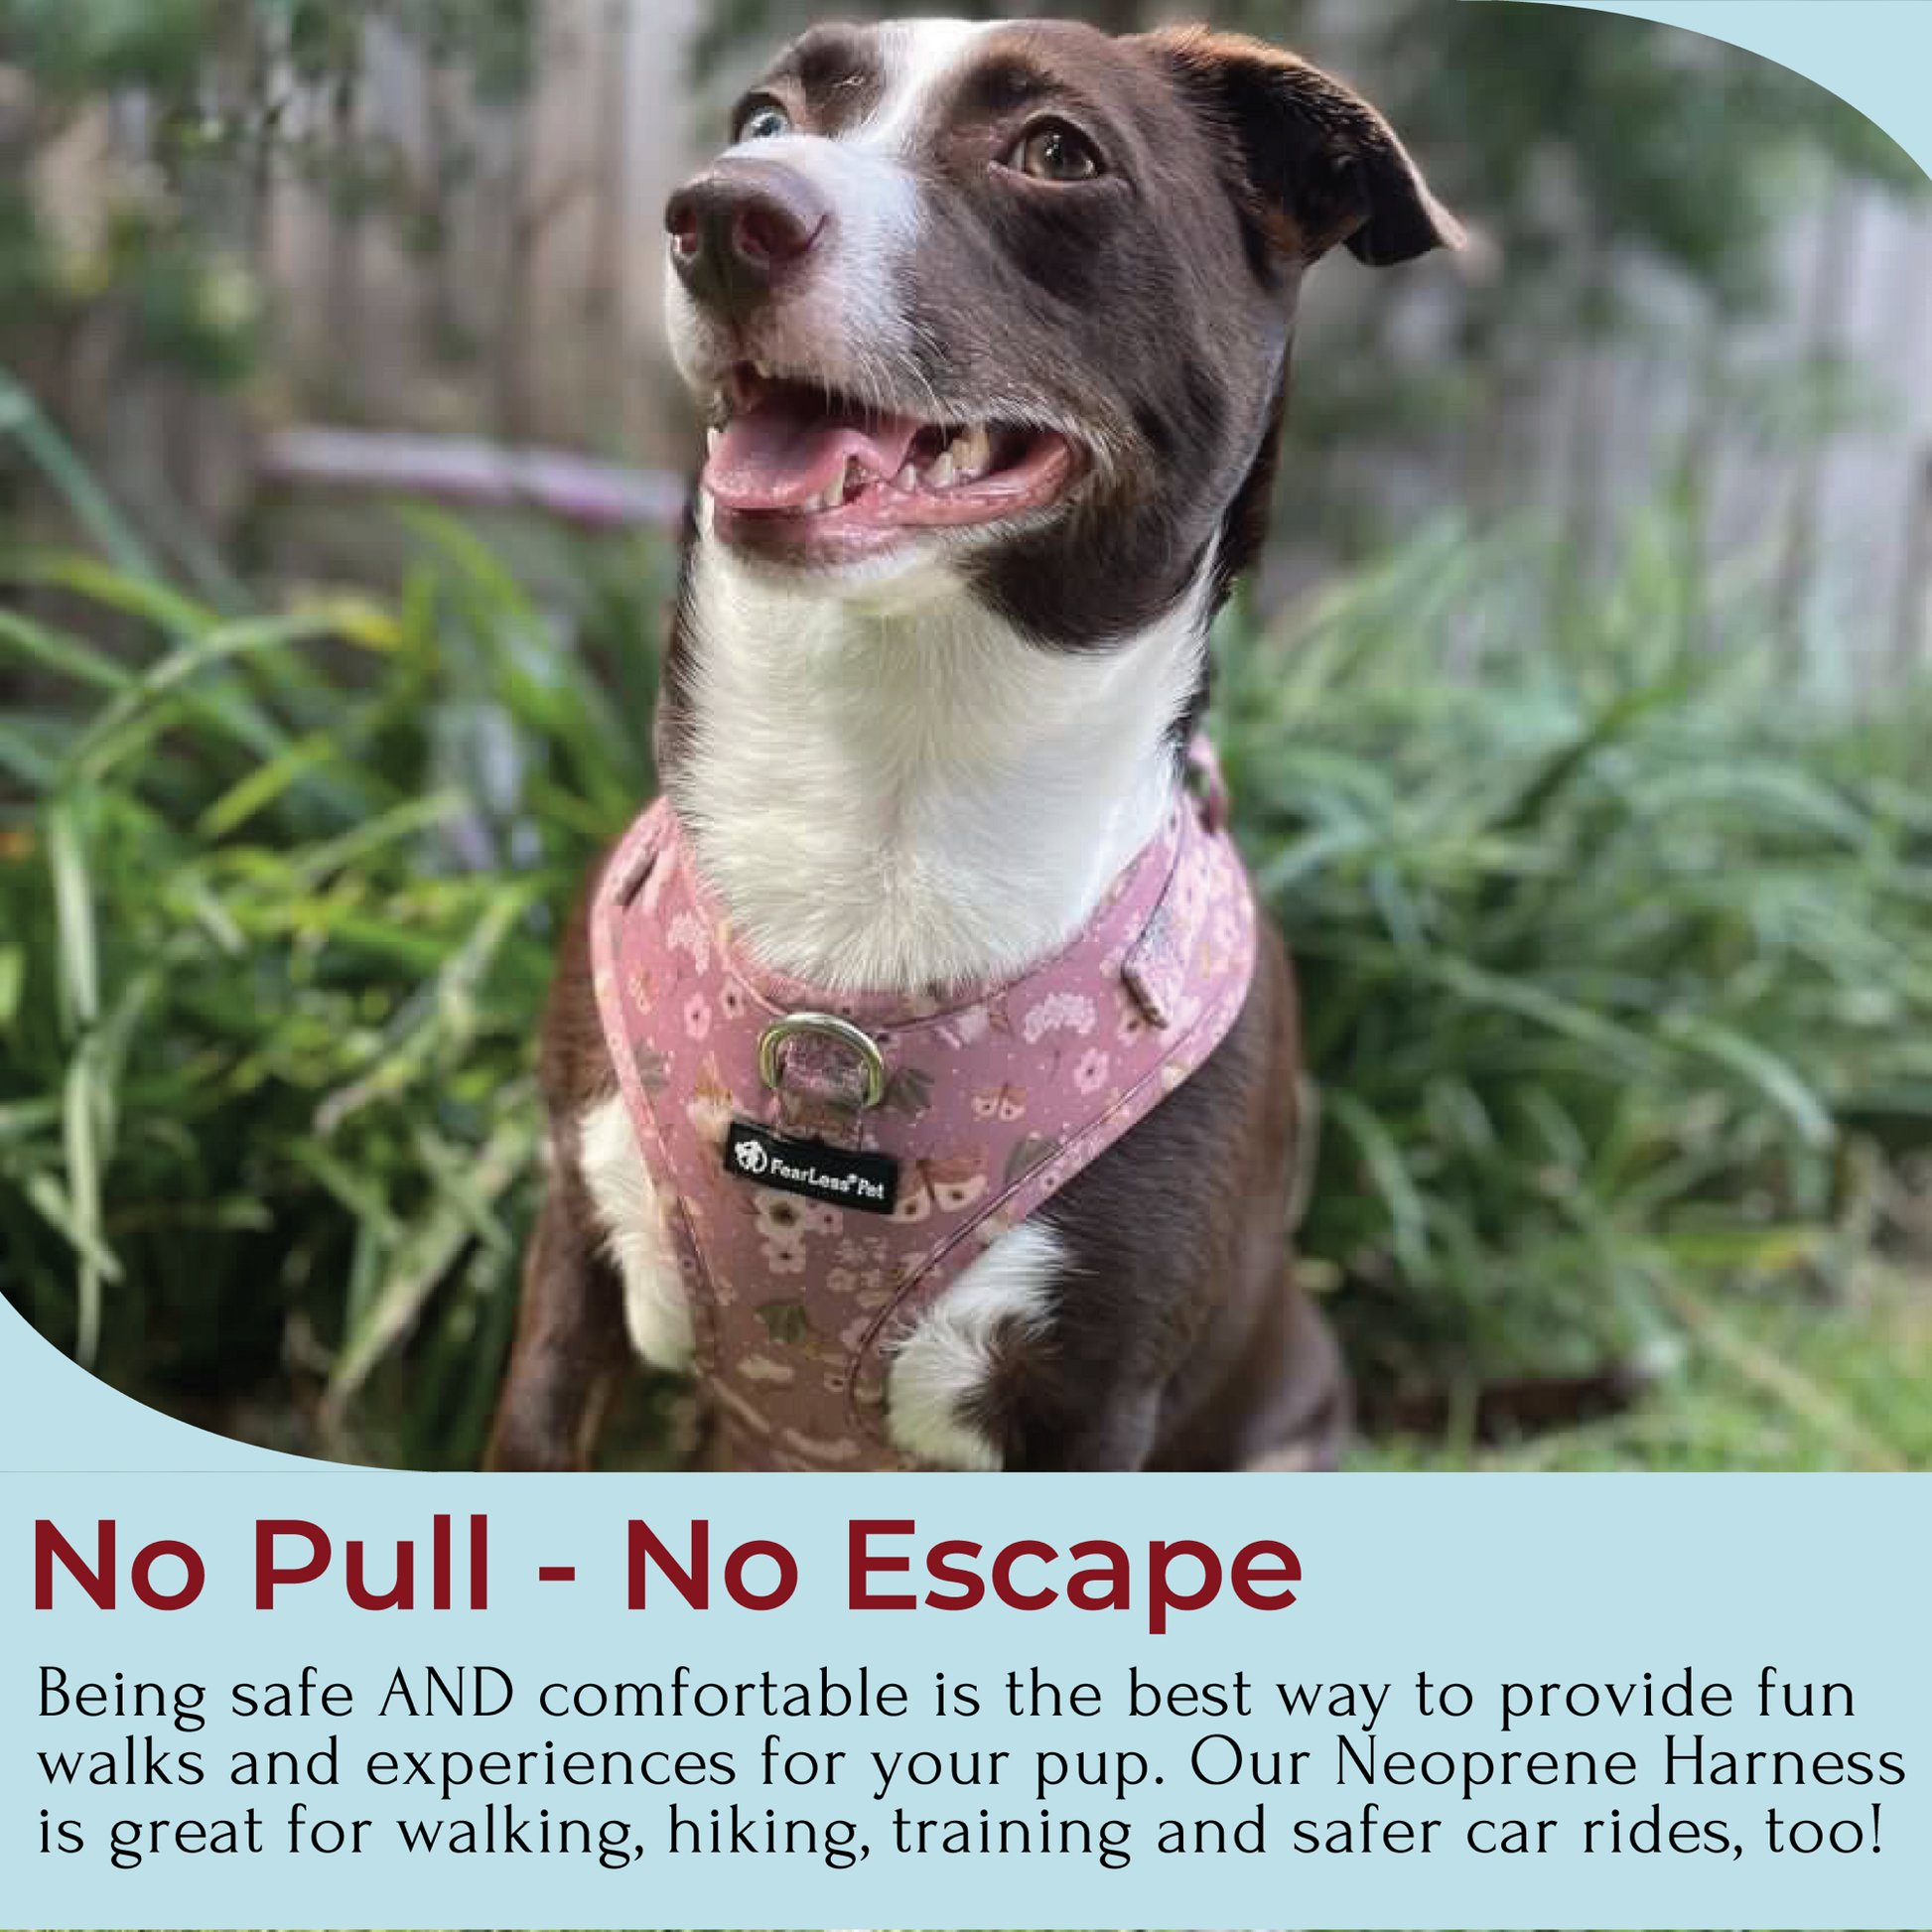 a photo of a dark brown and white dog wearing a neoprene harness with no pull no escape statement below on blue